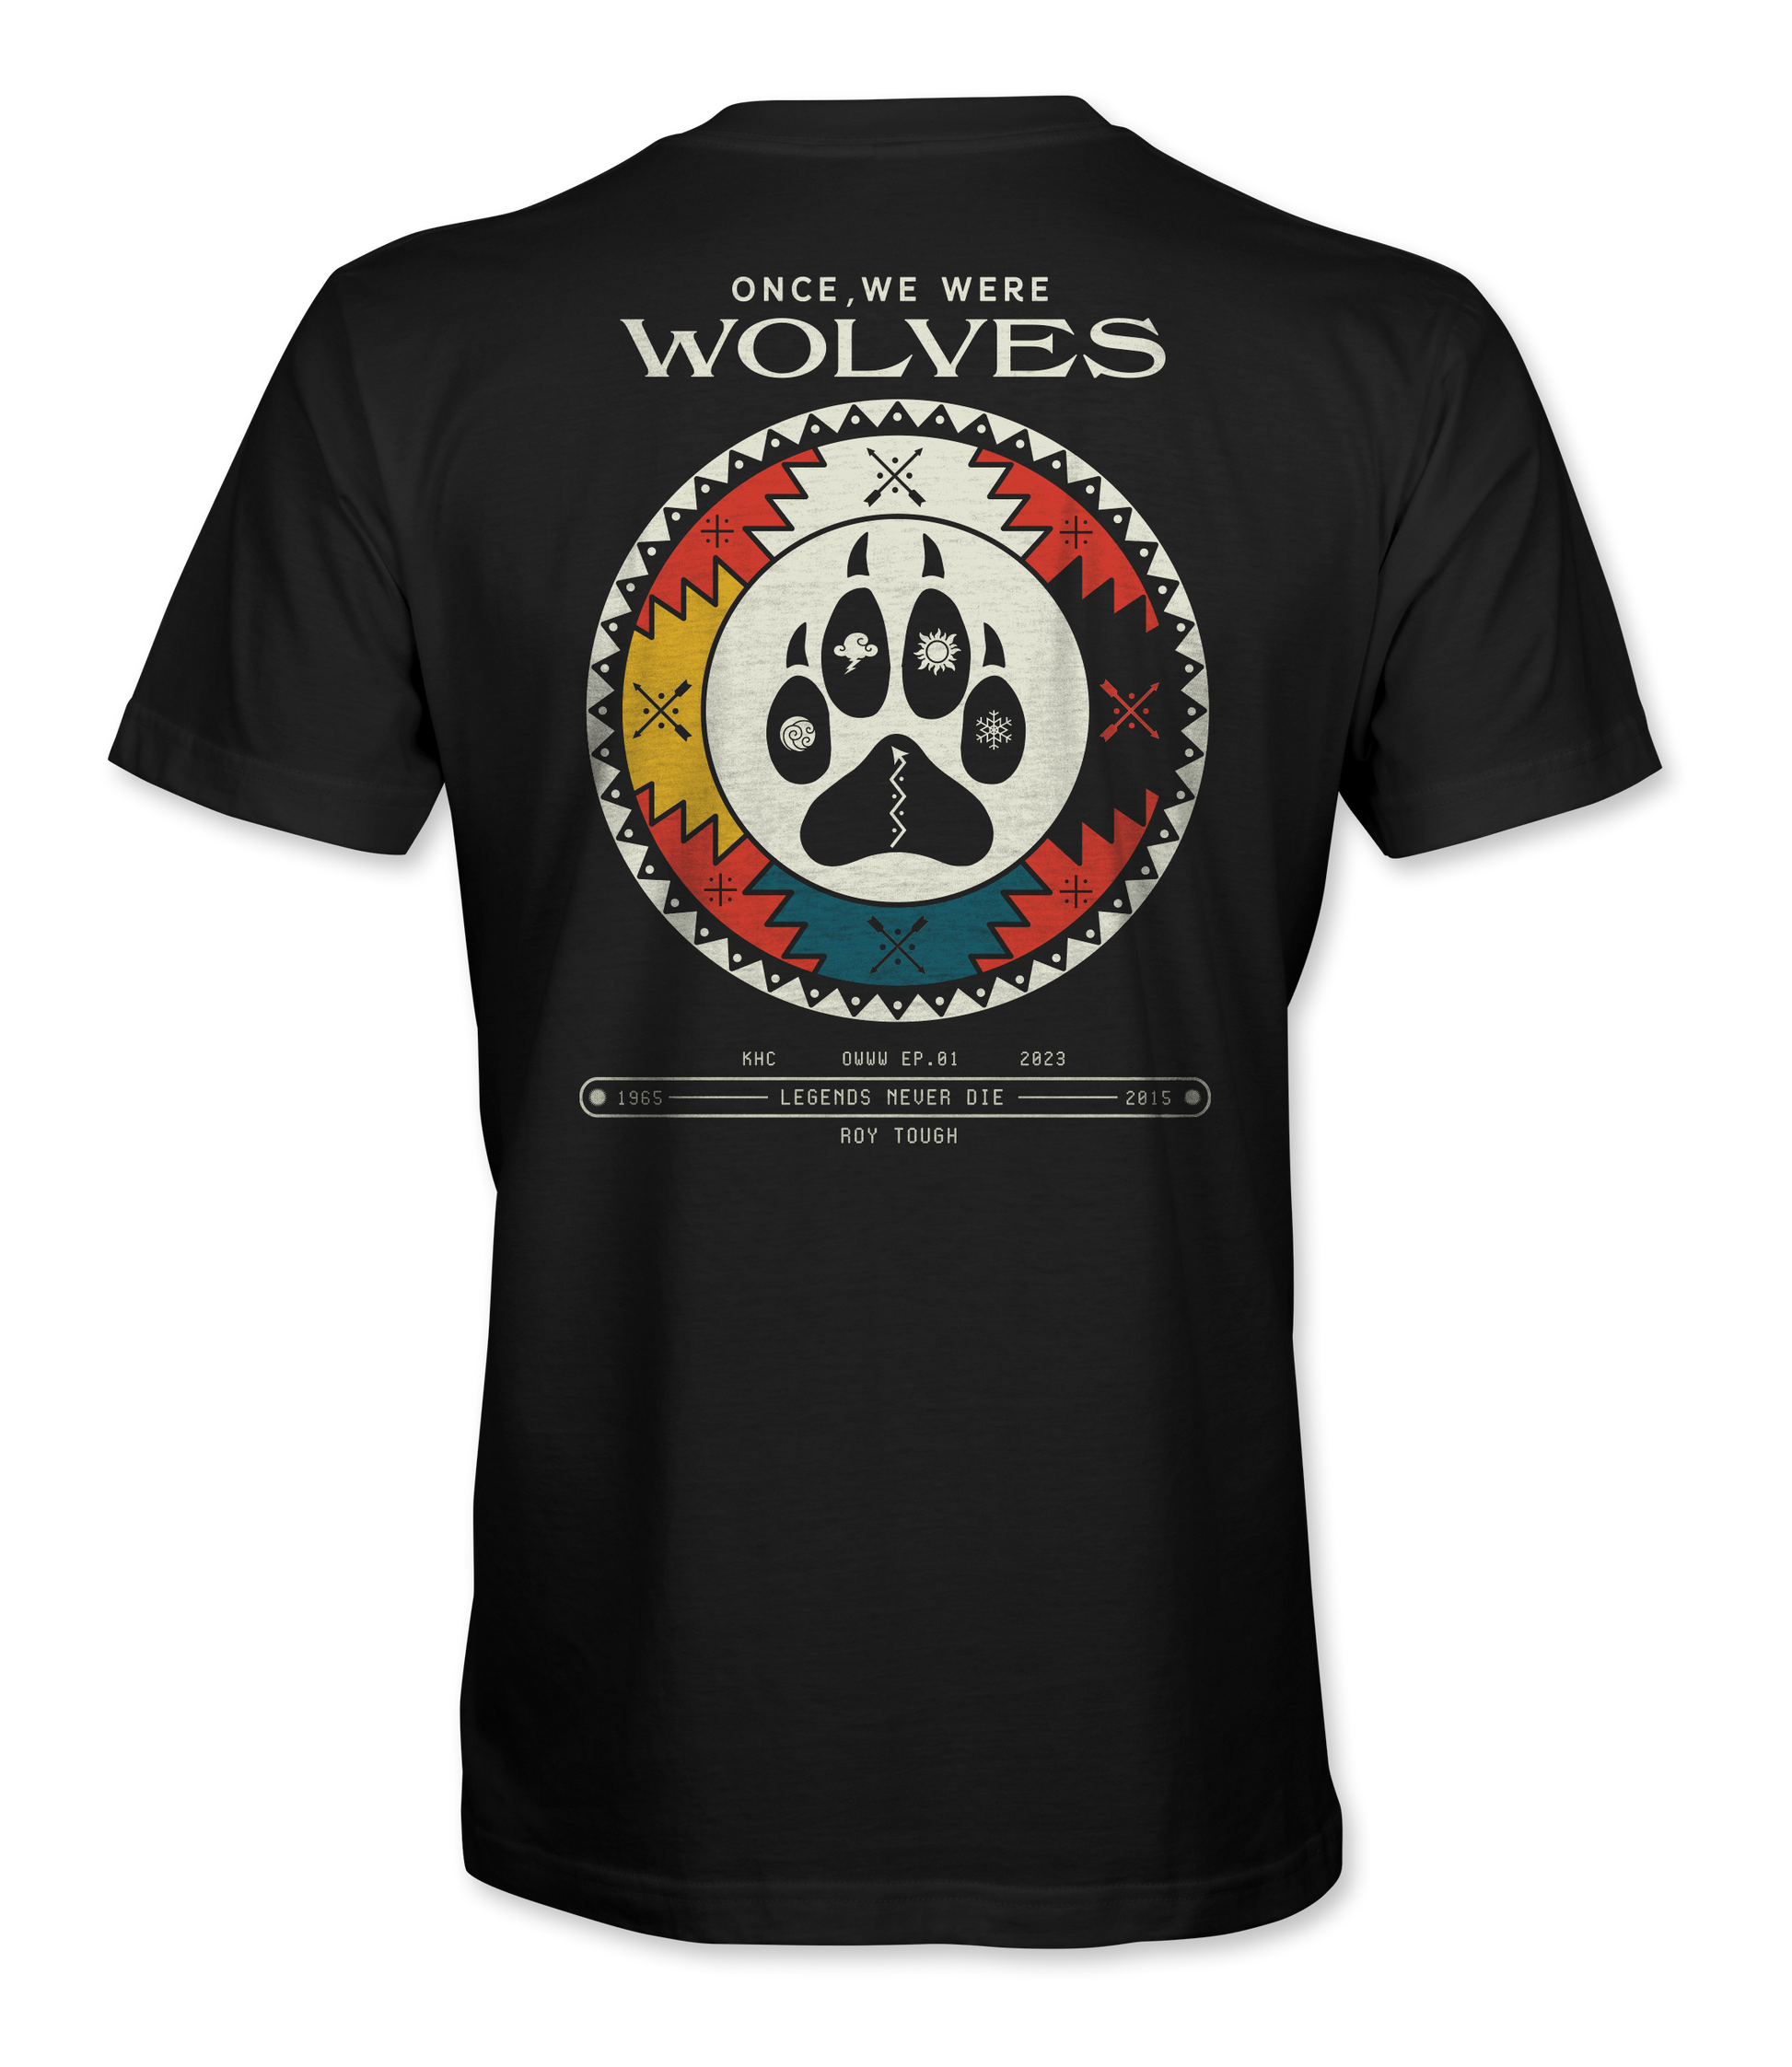 picture of the back of a black shirt with a indian tribal design and a wolf paw print